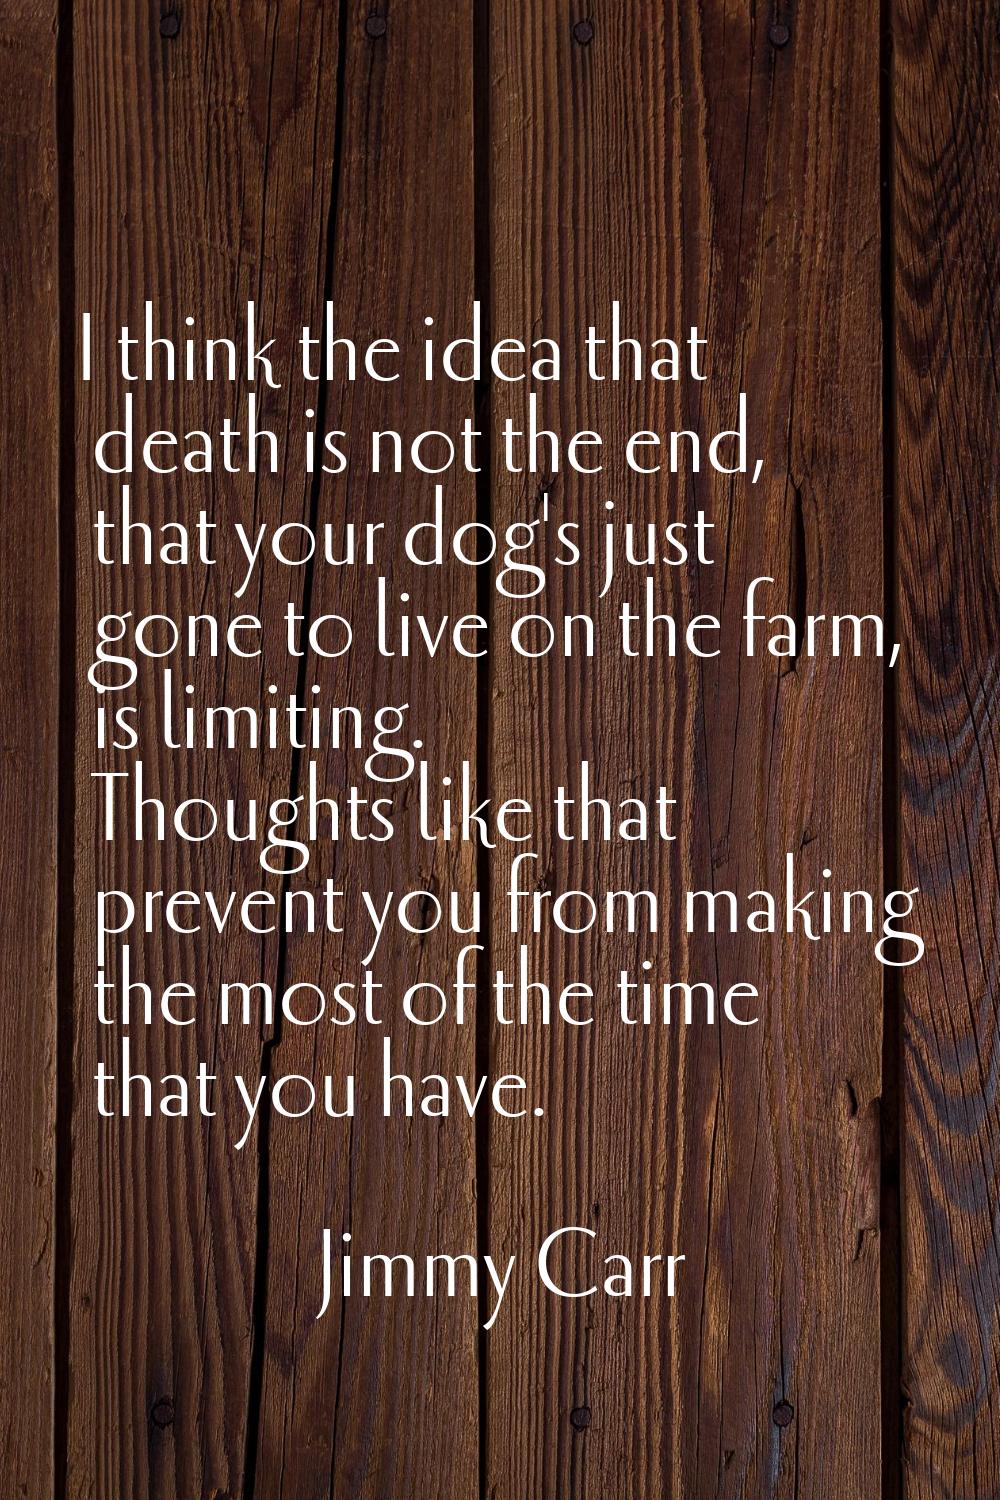 I think the idea that death is not the end, that your dog's just gone to live on the farm, is limit